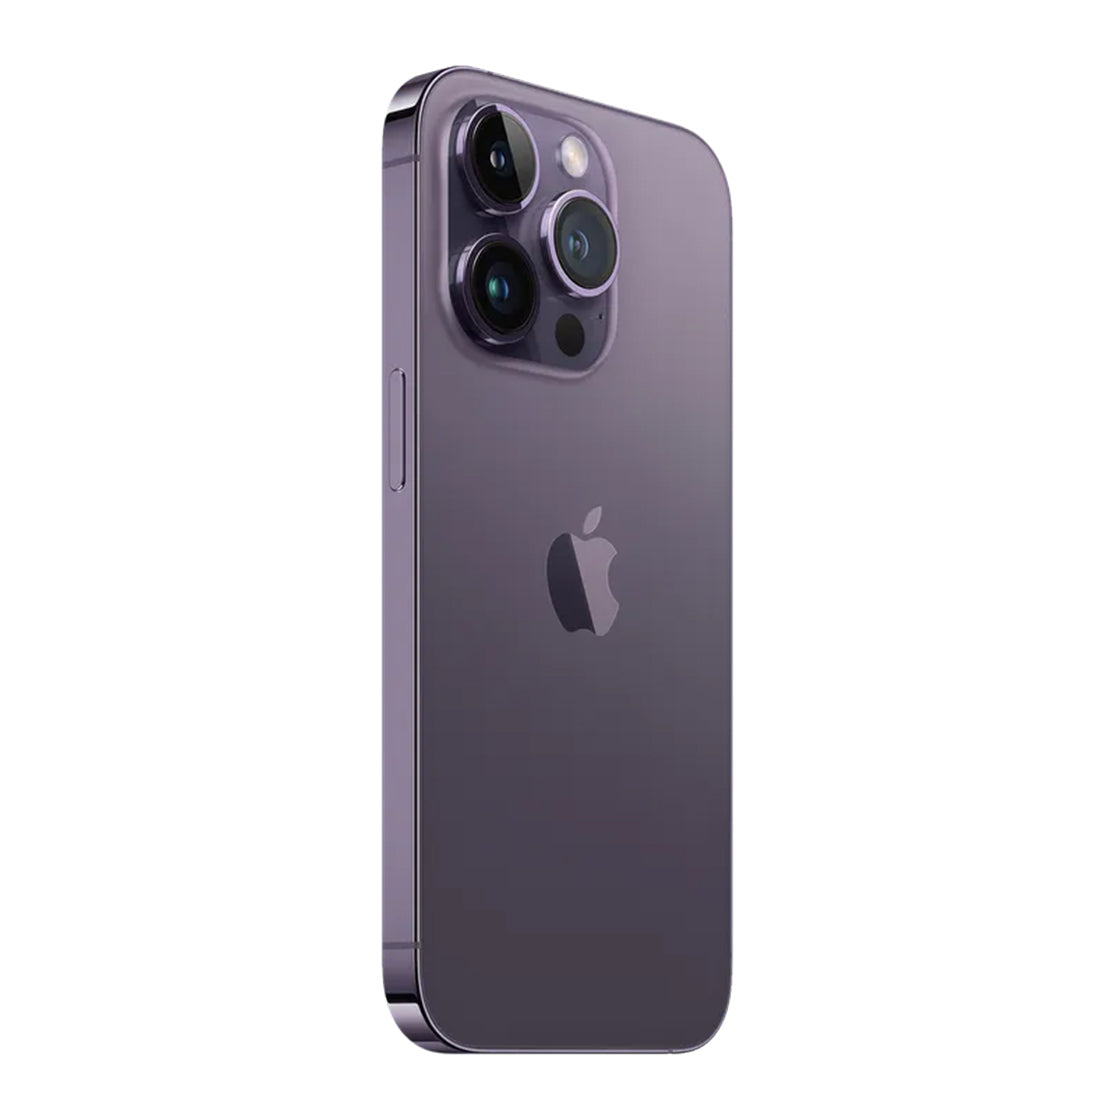  iPhone 14 Pro Max sophistication unveiled